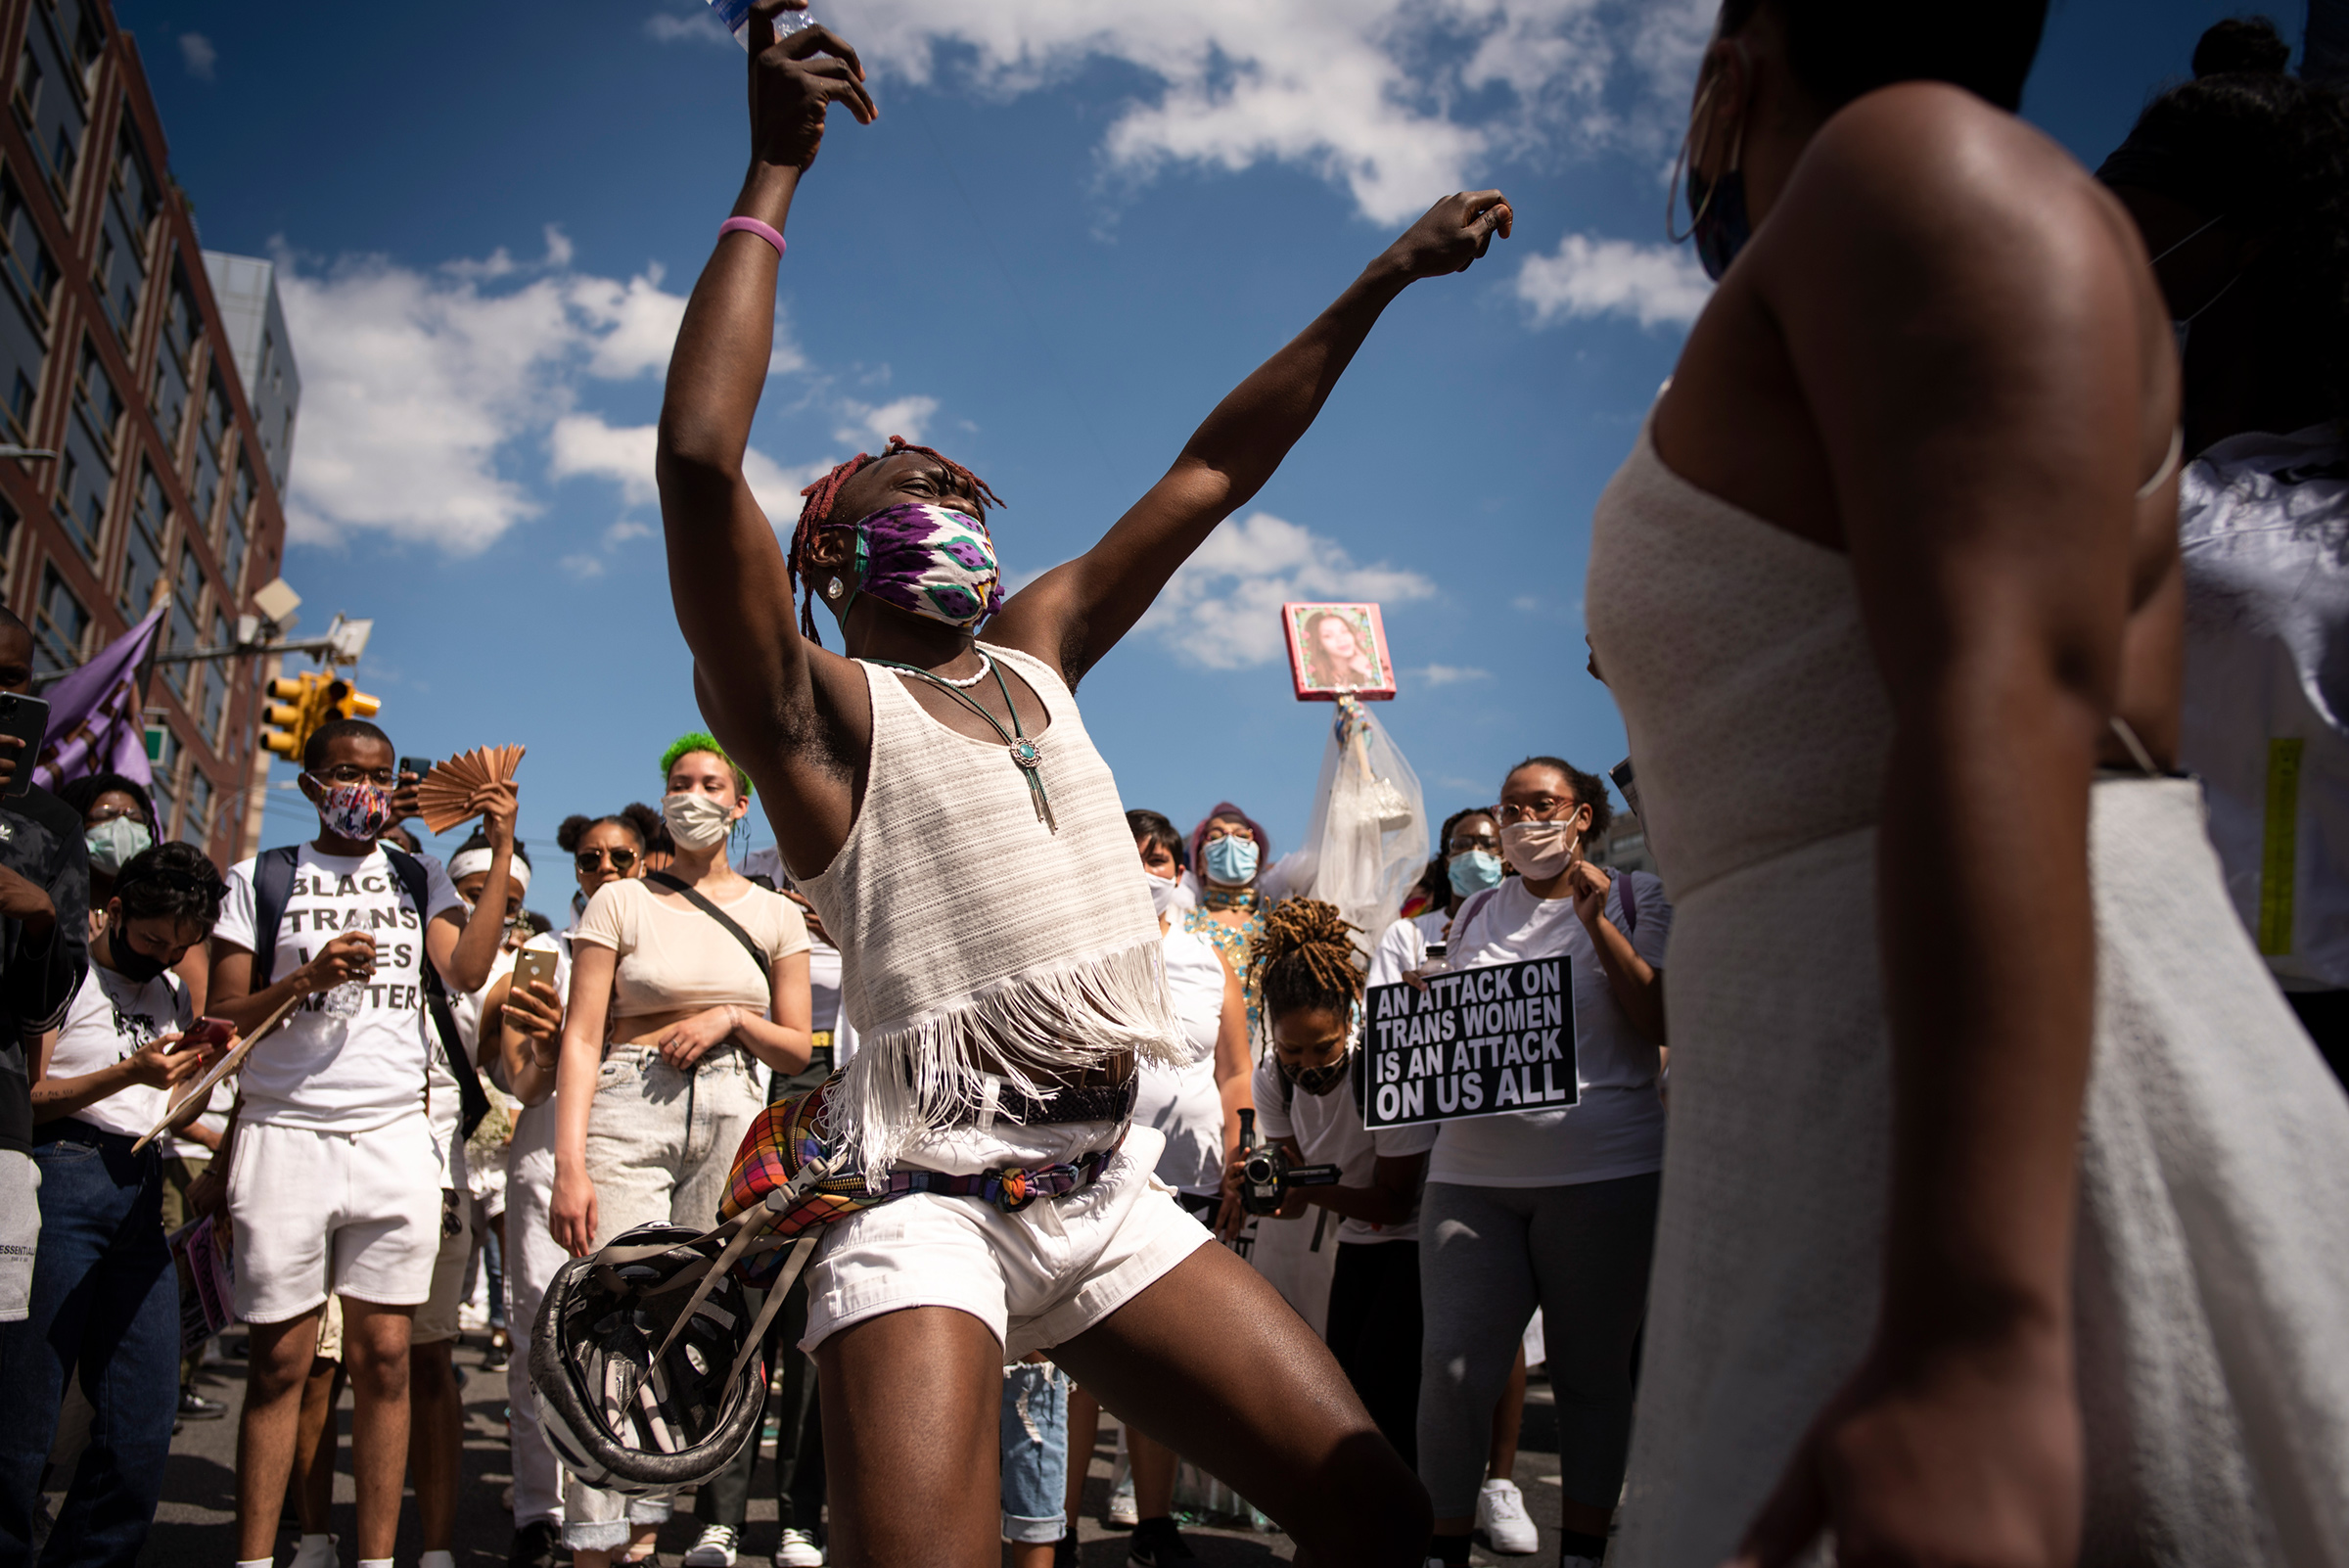 An estimated 15,000 supporters of Black Trans Lives marched in a rally from the Brooklyn Museum to Fort Greene Park in Brooklyn, N.Y. demanding justice for murdered members of their community on June 14, 2020. (Scout Tufankjian—Polaris)